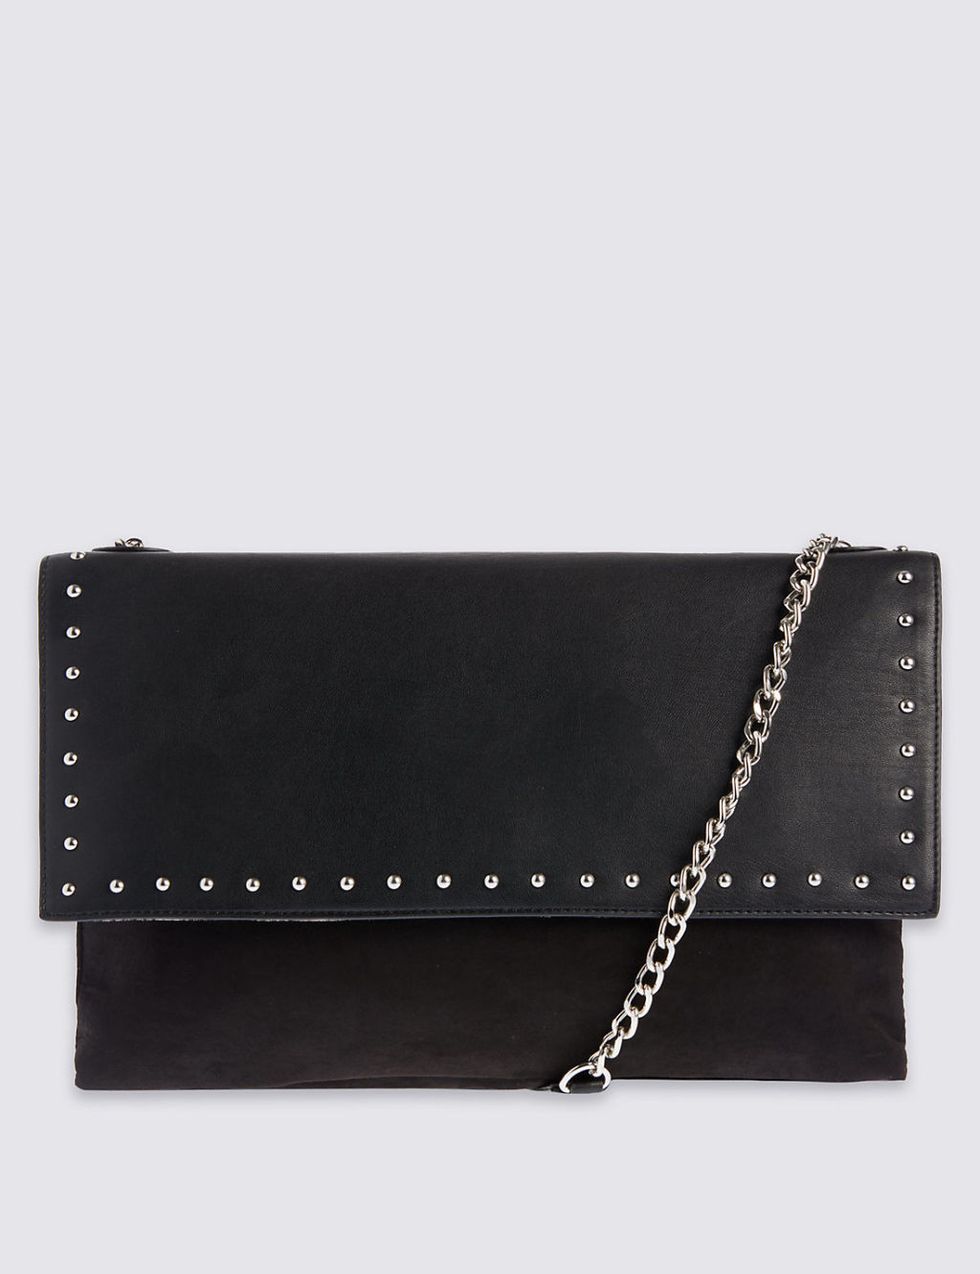 <p>Studs are the perfect way to update the simple black flap bag - and this one has the added bonus of being able to hold your whole emergency makeup bag.<a href="http://www.marksandspencer.com/shoulder-hand-bag/p/p22482208?image=SD_01_T01_0371Q_Y0_X_EC_90&amp;color=BLACK&amp;prevPage=plp#" target="_blank"></a></p><p><a href="http://www.marksandspencer.com/shoulder-hand-bag/p/p22482208?image=SD_01_T01_0371Q_Y0_X_EC_90&amp;color=BLACK&amp;prevPage=plp#" target="_blank">Shoulder handbag, £29.50, Marks &amp; Spencer</a></p>